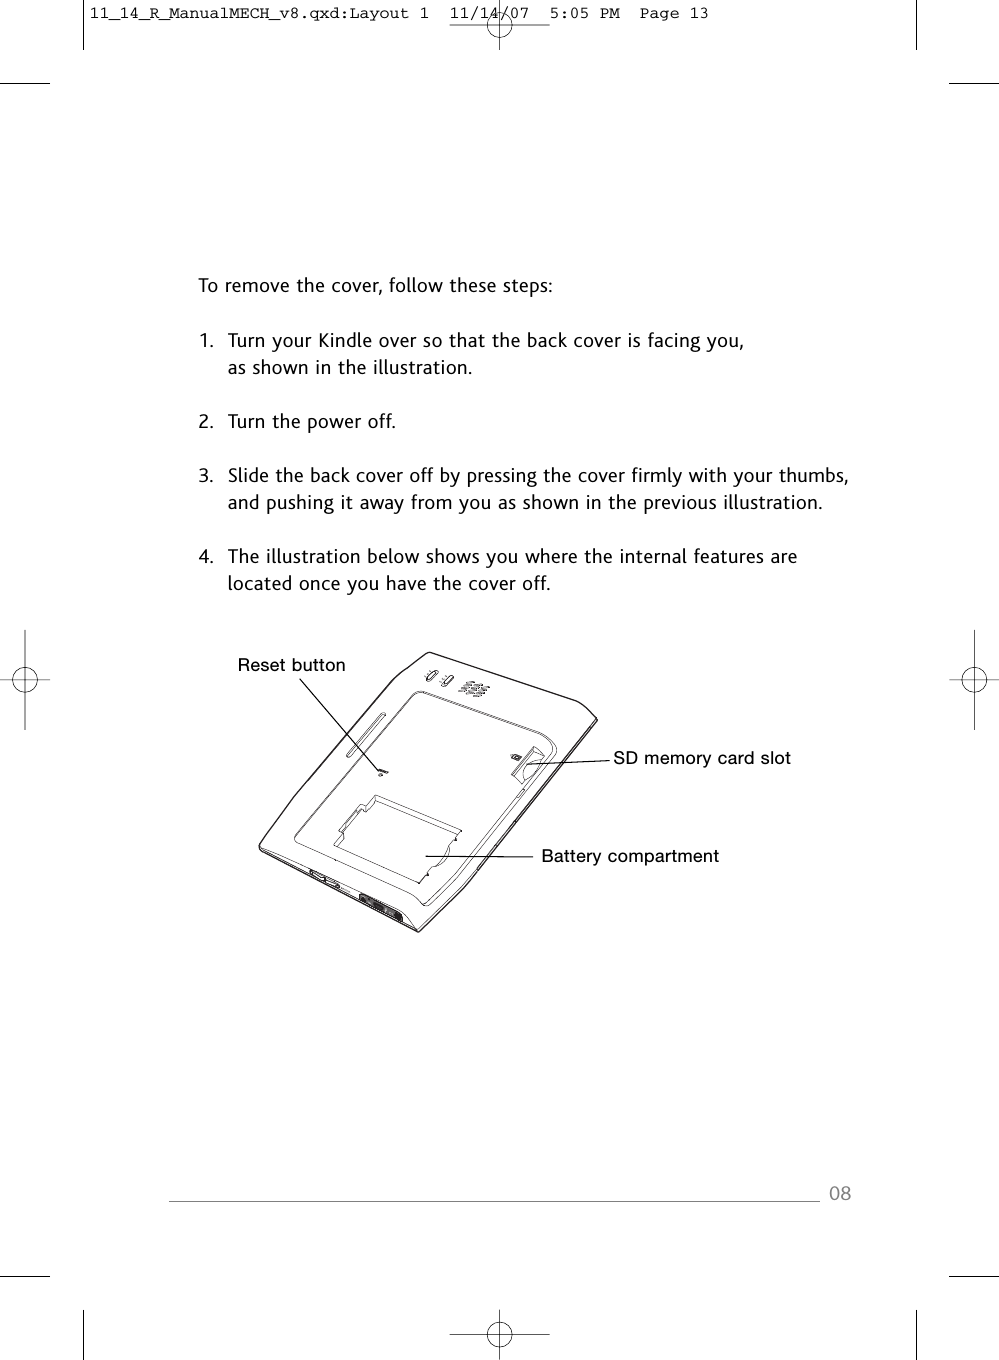 To remove the cover, follow these steps:1. Turn your Kindle over so that the back cover is facing you,as shown in the illustration.2. Turn the power off.3. Slide the back cover off by pressing the cover firmly with your thumbs,and pushing it away from you as shown in the previous illustration.4. The illustration below shows you where the internal features arelocated once you have the cover off.08SD memory card slotBattery compartmentReset button11_14_R_ManualMECH_v8.qxd:Layout 1  11/14/07  5:05 PM  Page 13